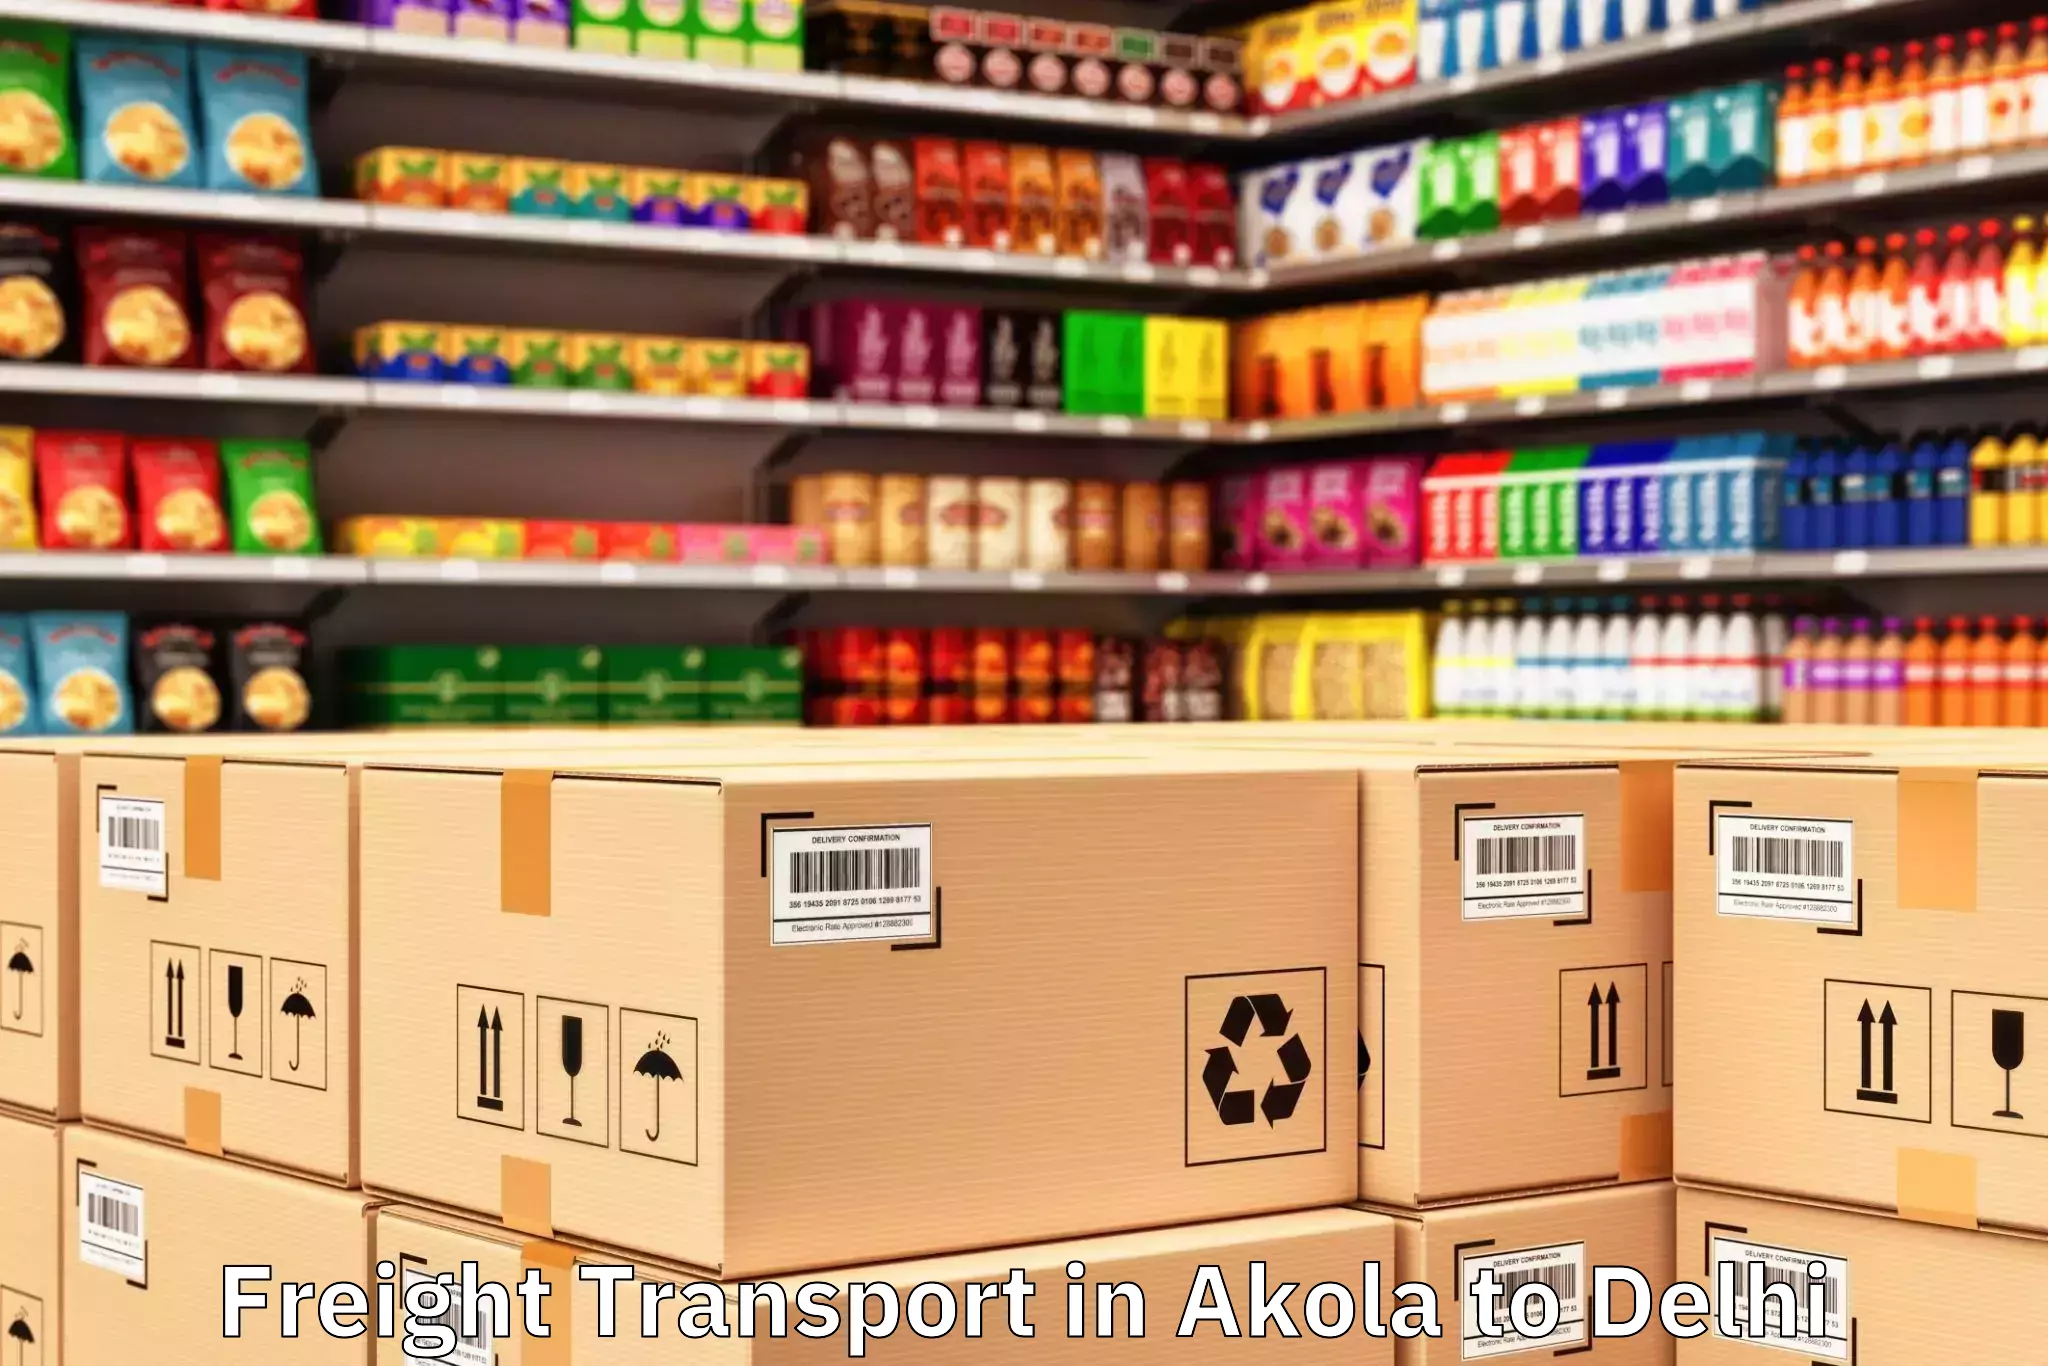 Get Akola to Delhi Pharmaceutical Sciences And Research University New Delhi Freight Transport